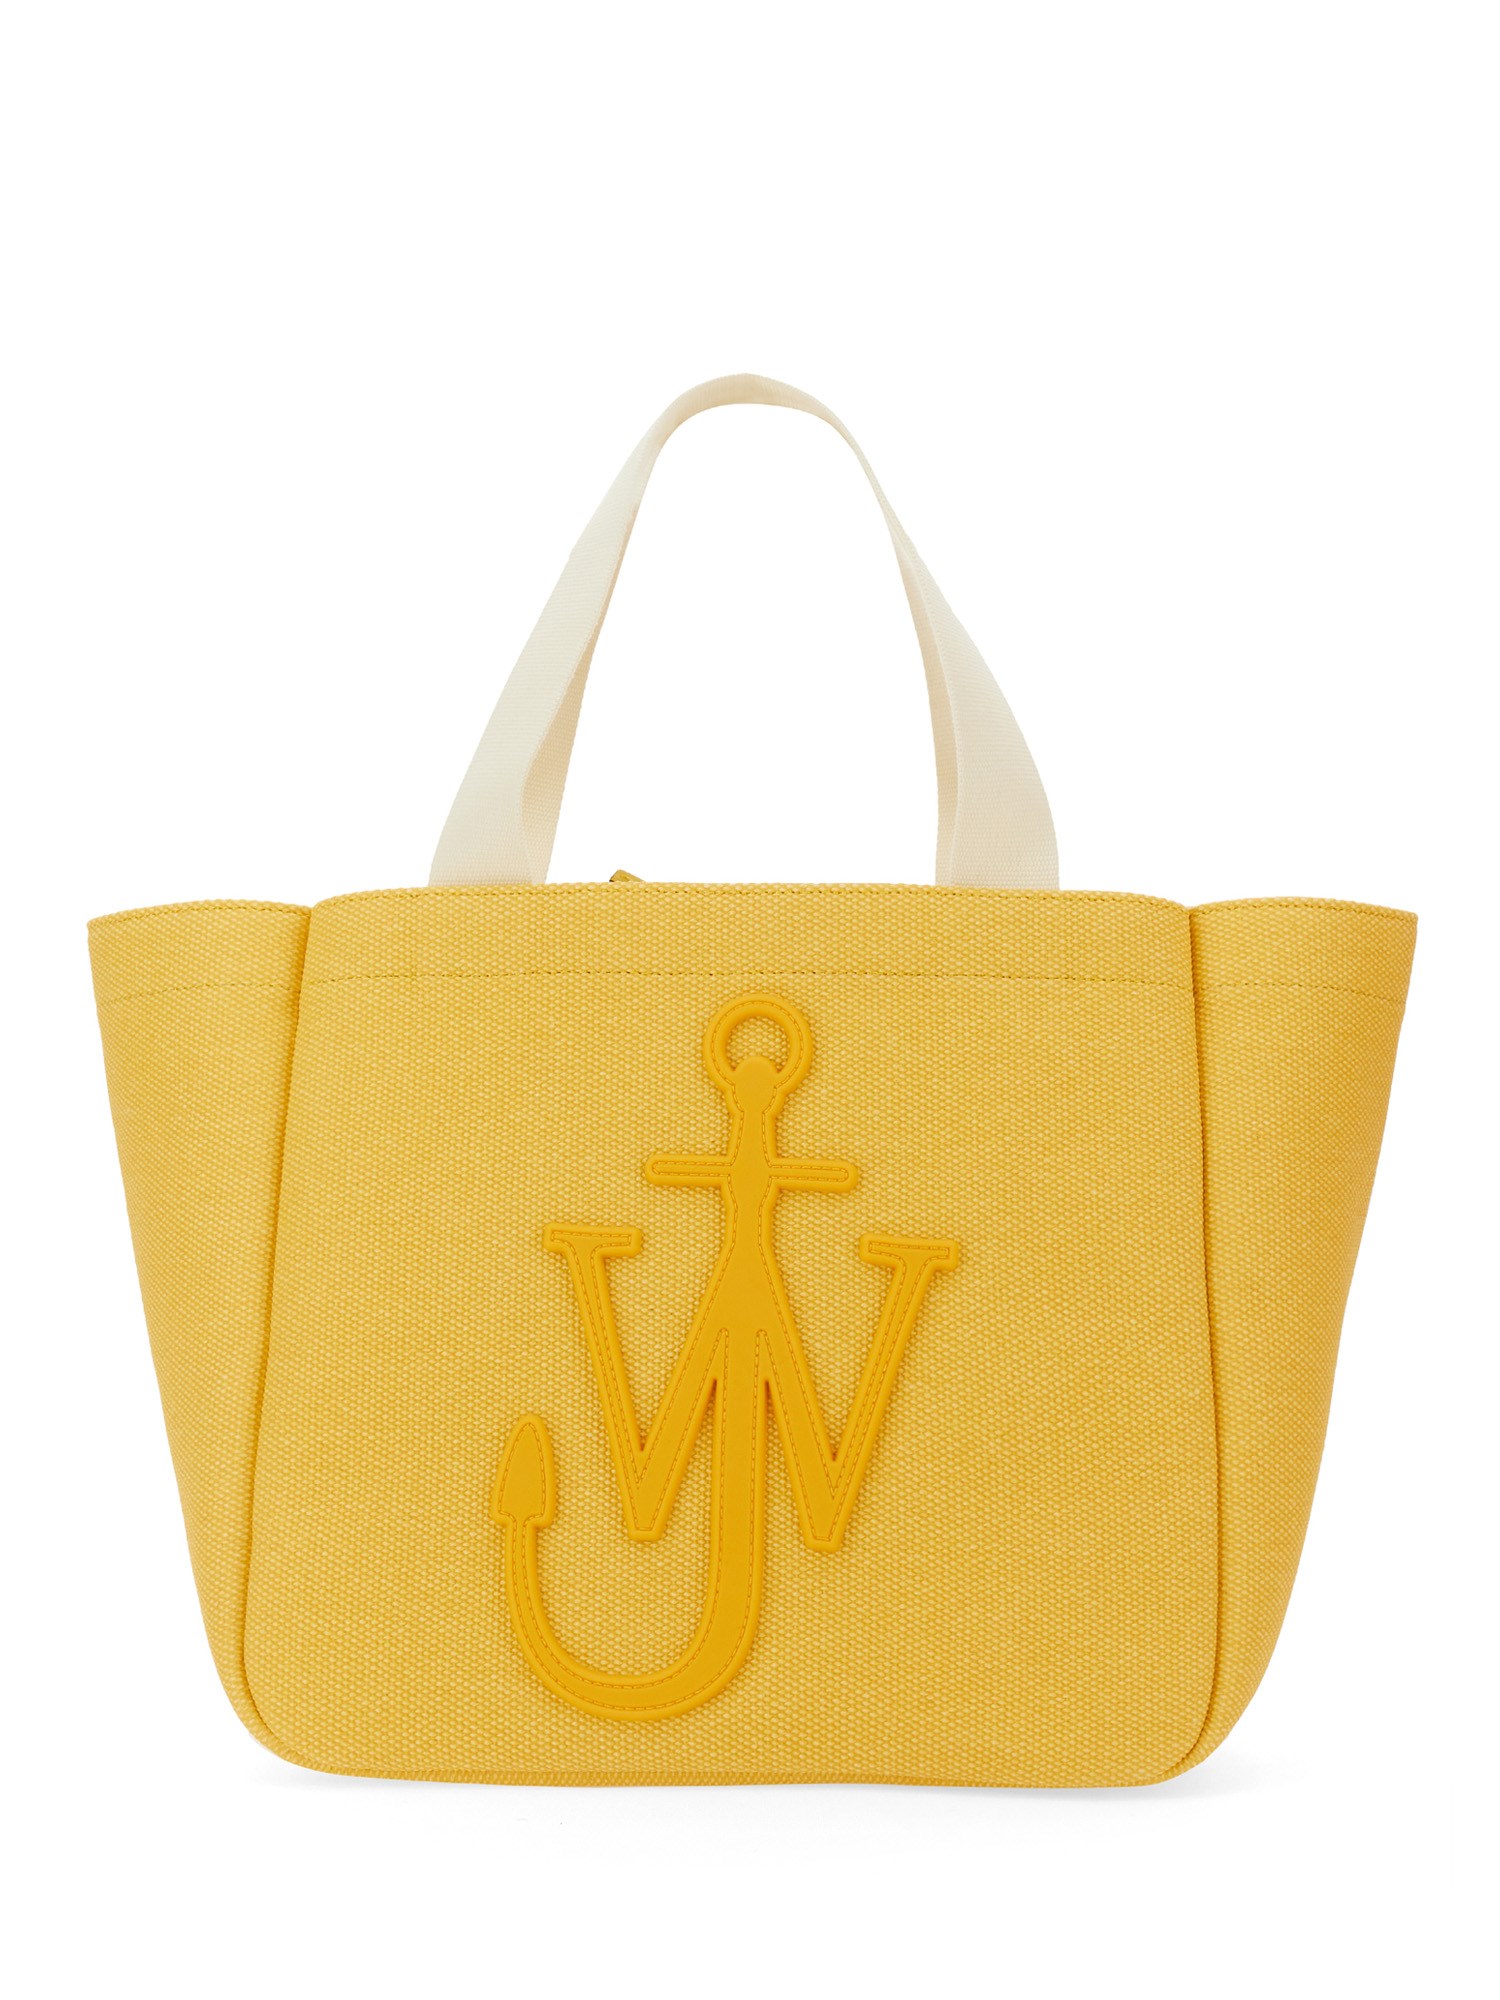 Jw Anderson Cabas Tote Bag In Yellow